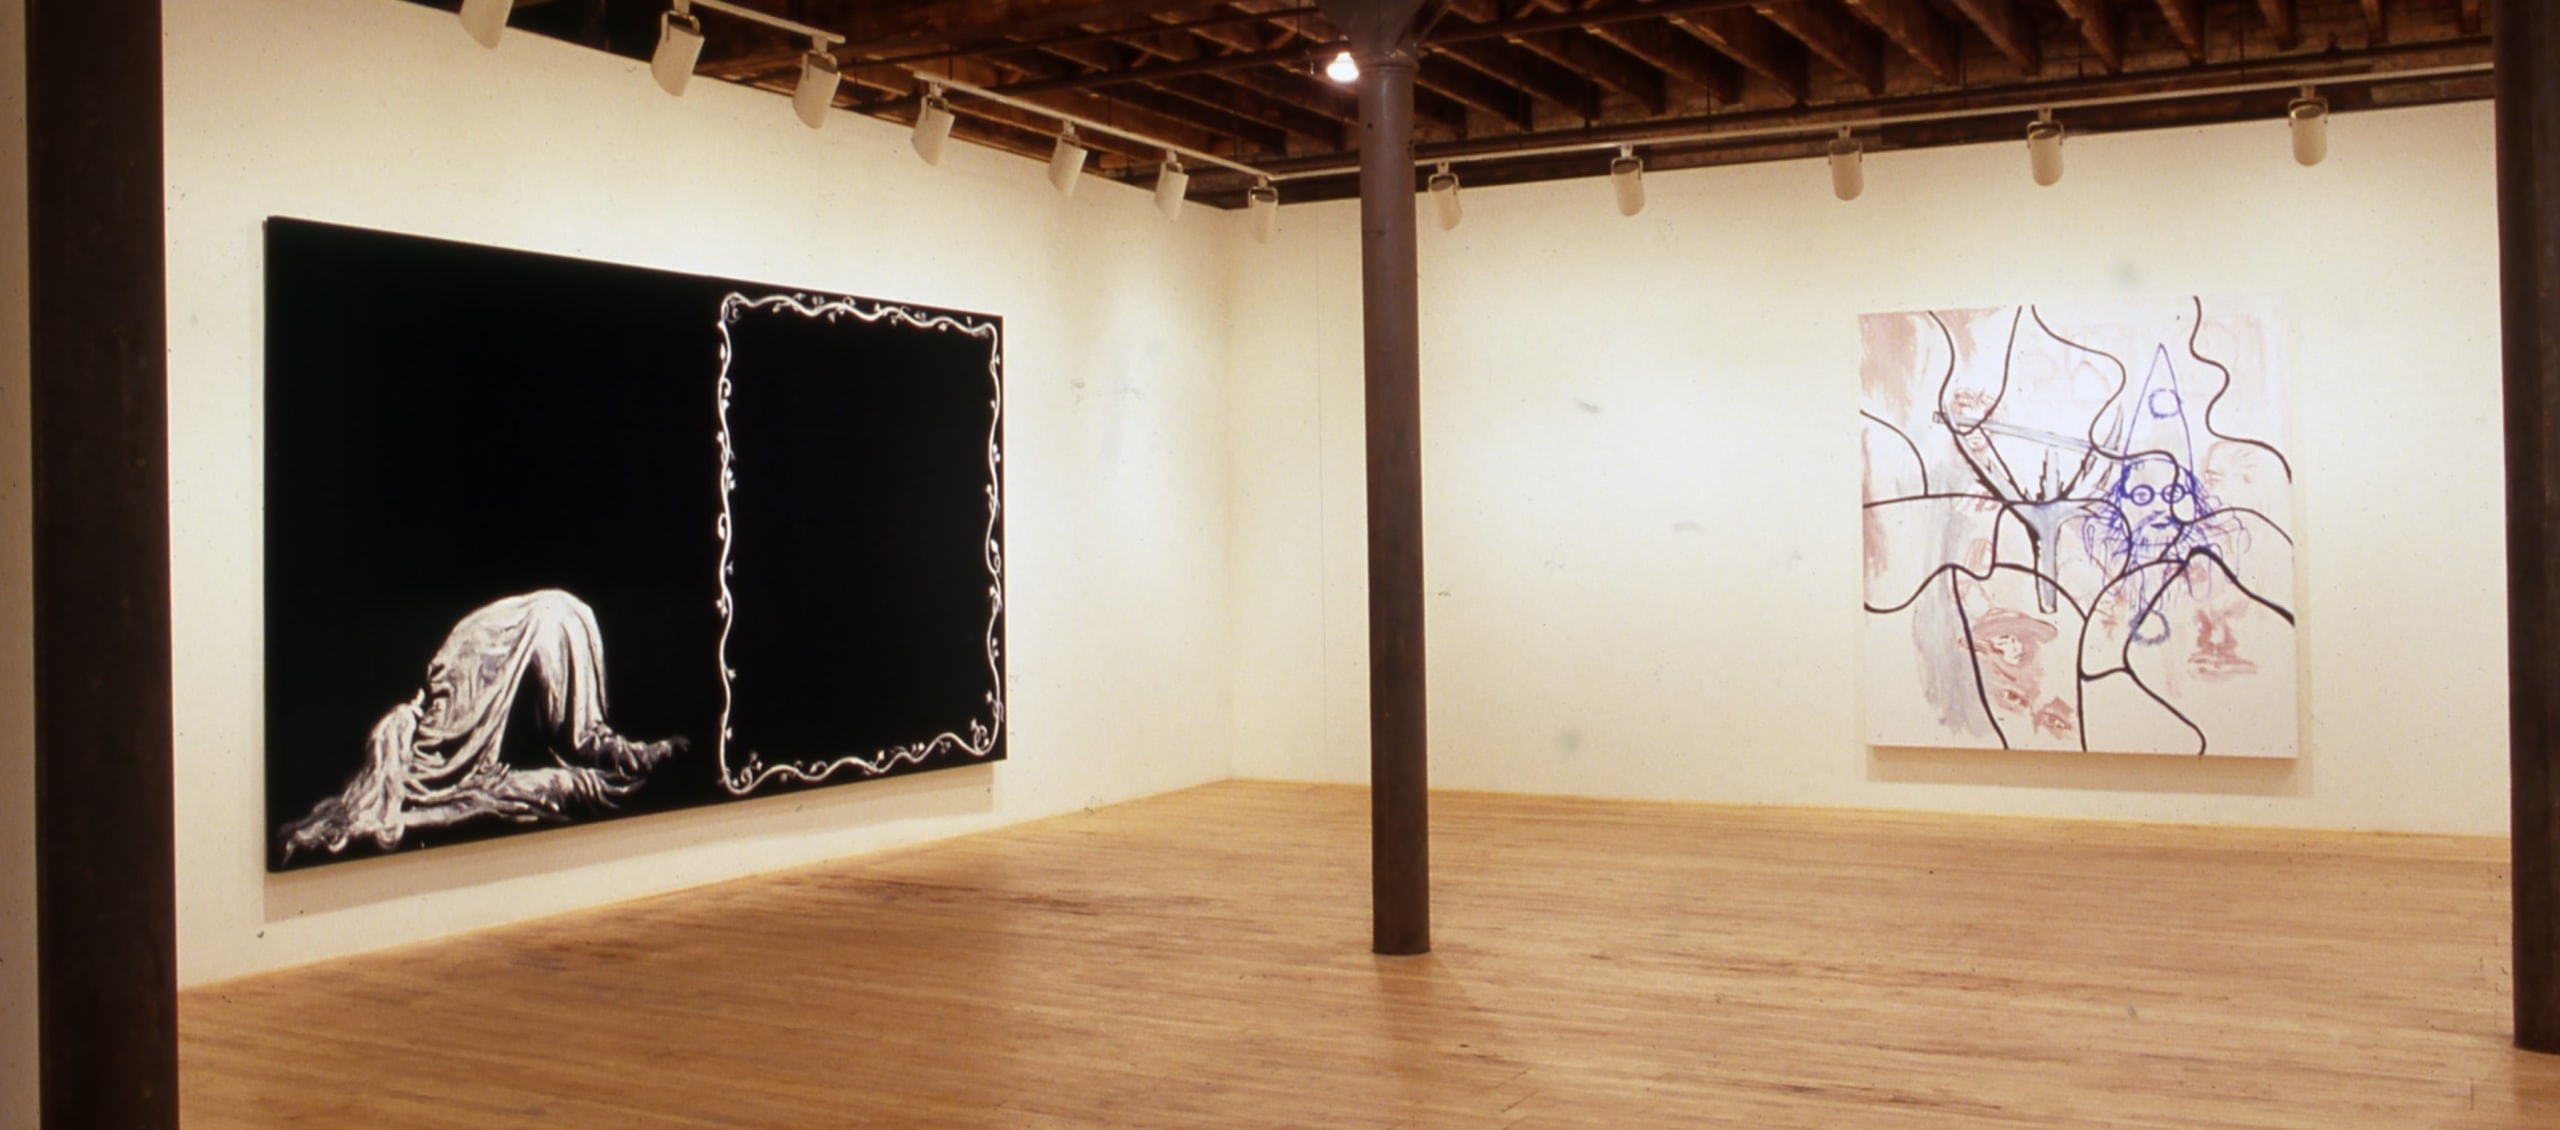 Installation view at Young Hoffman Gallery, Julian Schnabel, Ornamental Despair, Paintings and Works on Paper, 1980